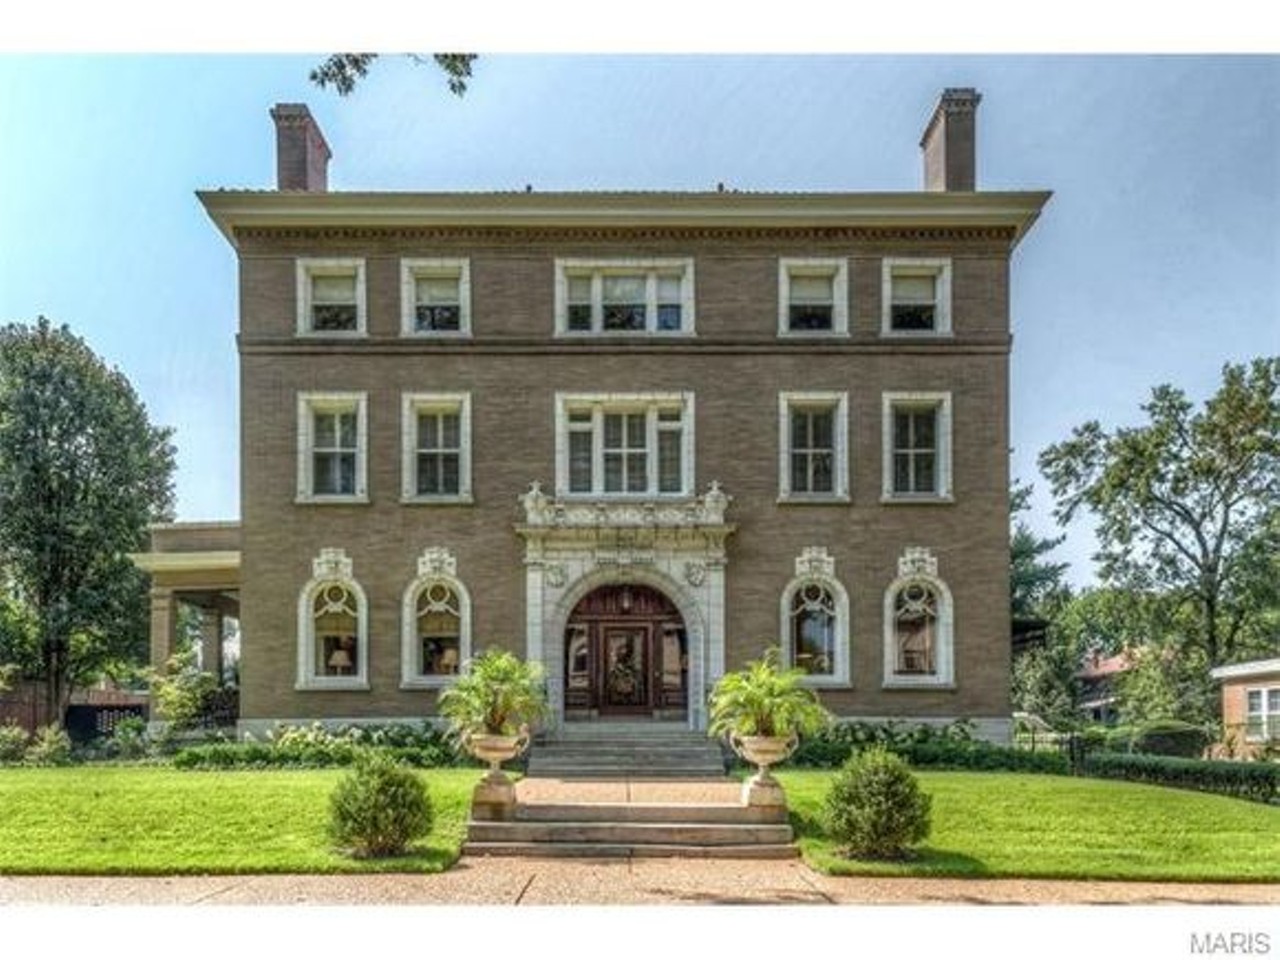 24 Washington Terrace in DeBaliviere Place is a bit more affordable at $1,395,000. That price still brings 7 bedrooms, 6 baths and what the Realtor calls "Beinke-Clymer's masterpiece."